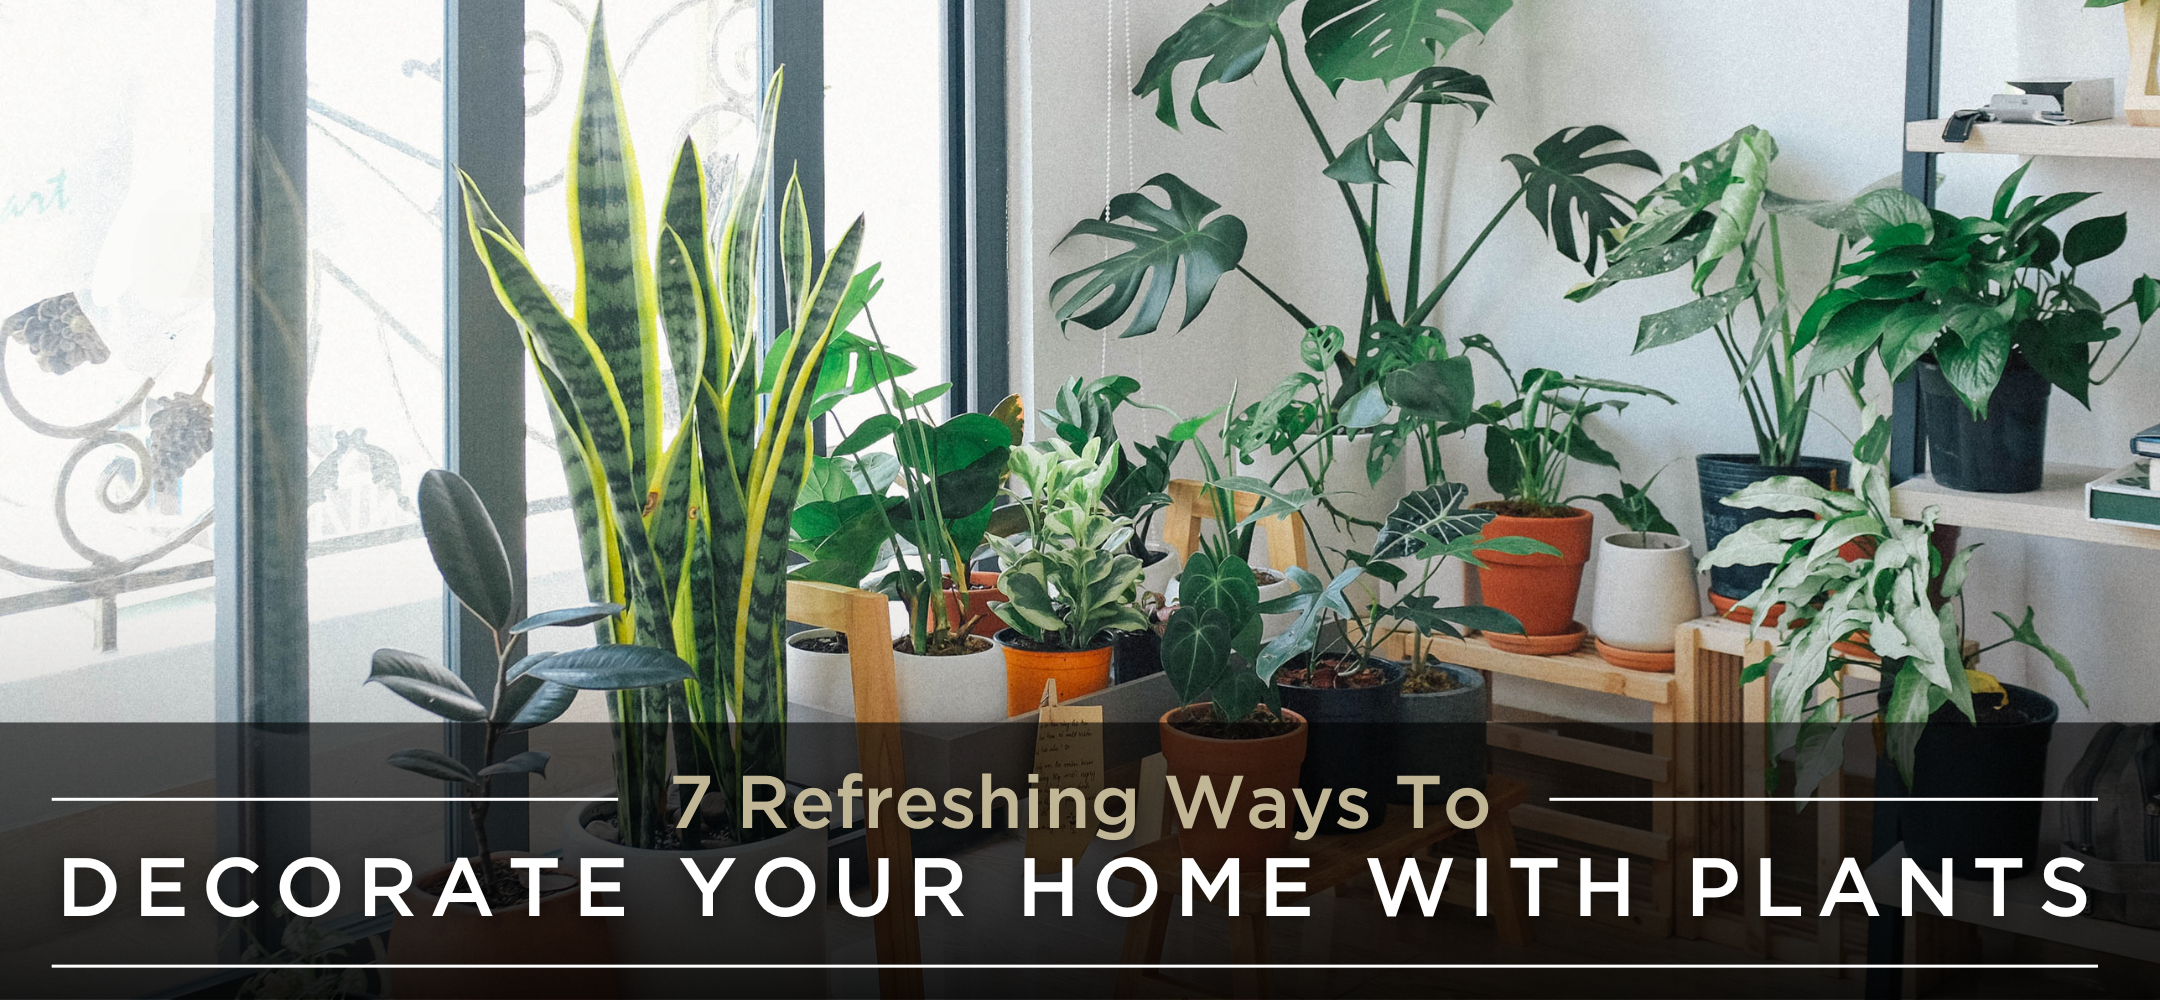 7 Refreshing ways to decorate your home with plants header image